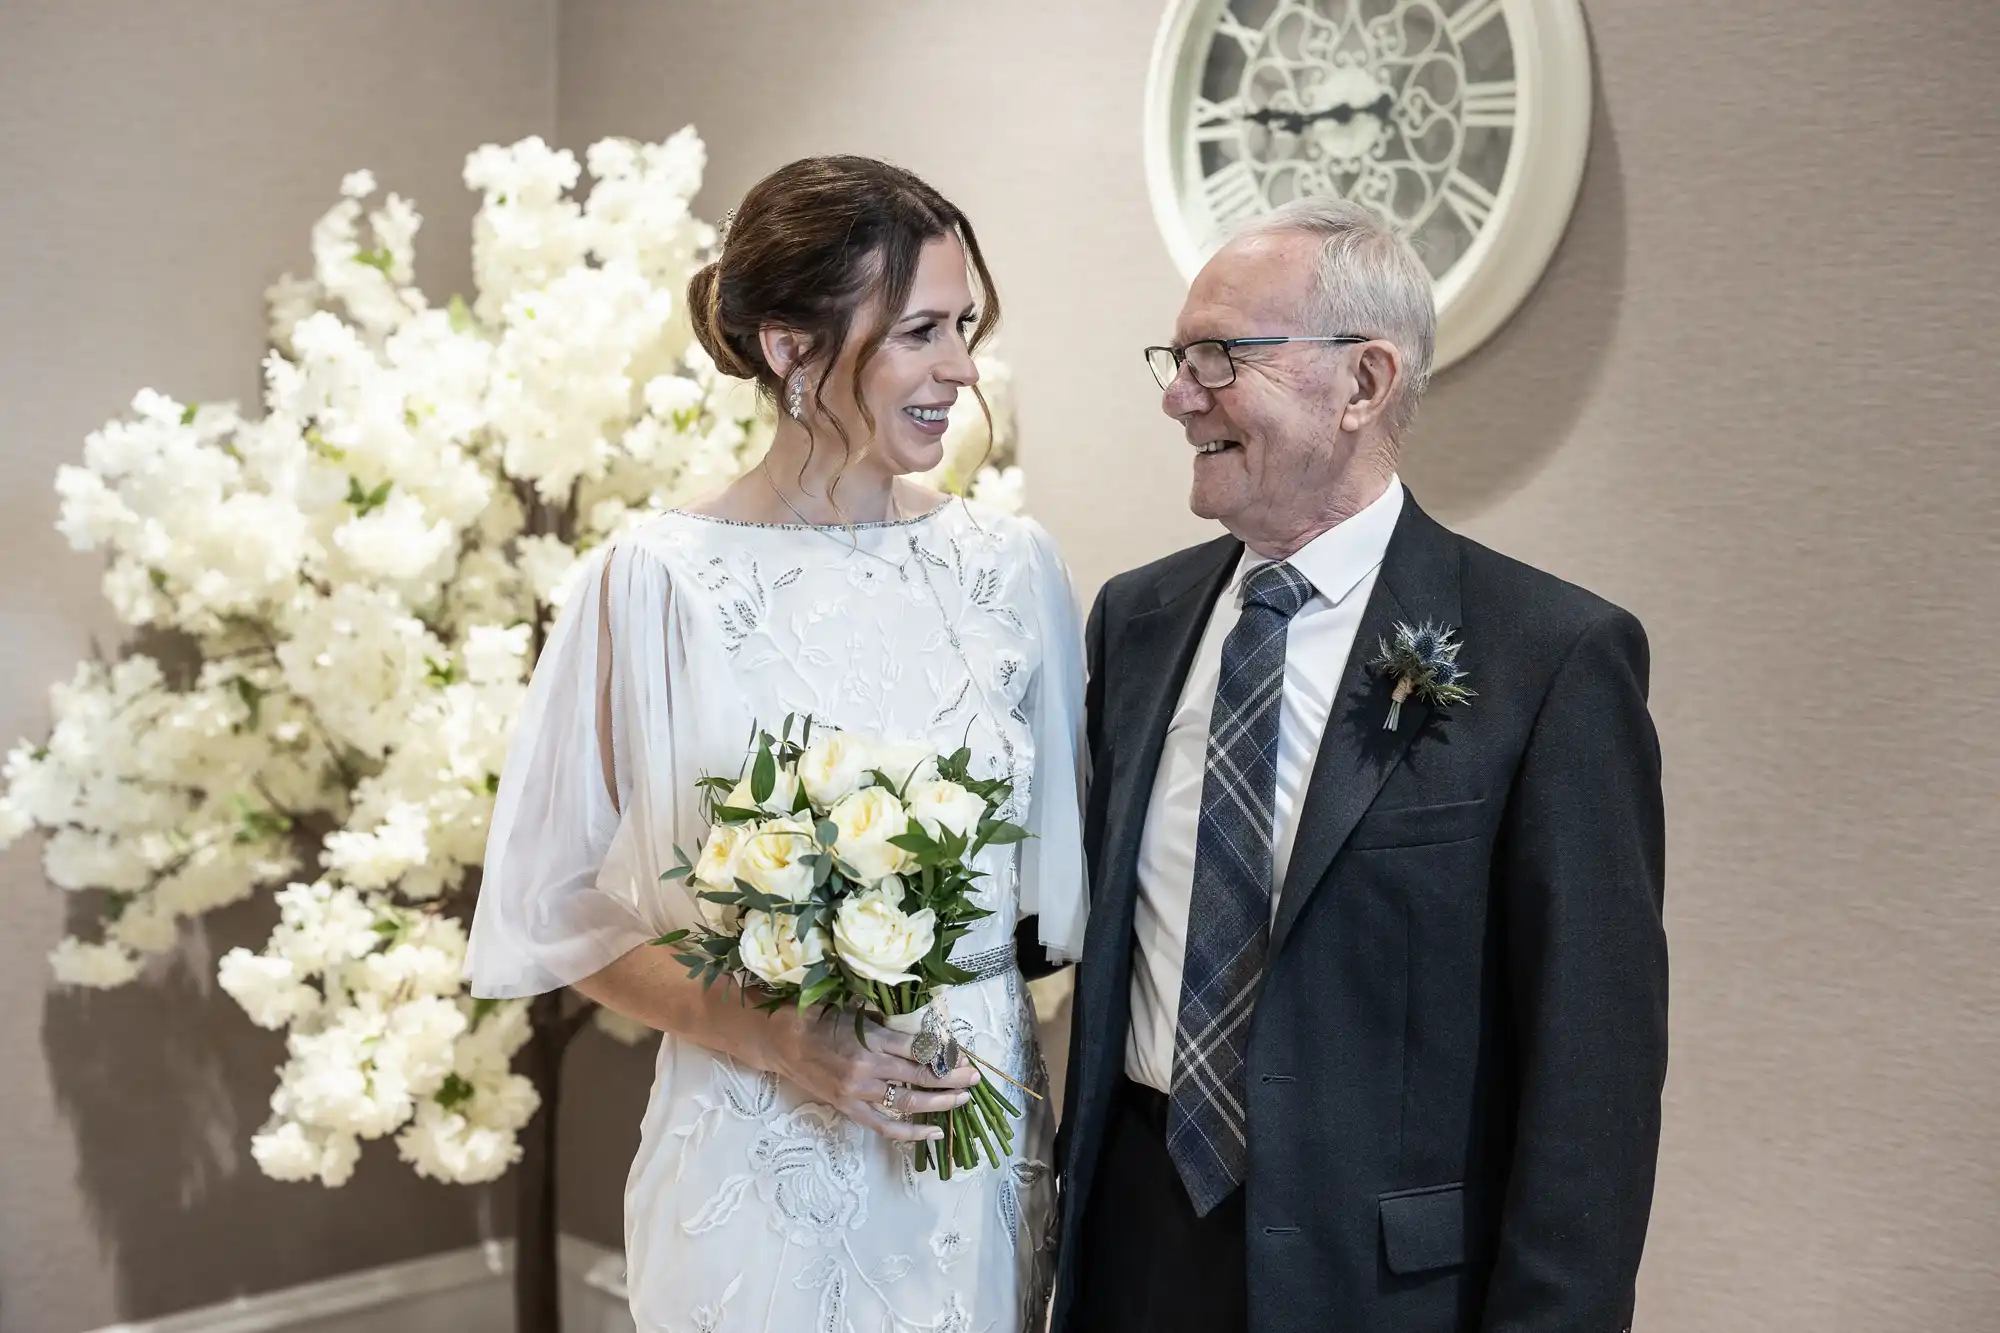 A smiling woman in a white dress holding a bouquet of white roses stands next to an older man in a suit and tie. They are standing in front of a flowering tree and a wall clock.